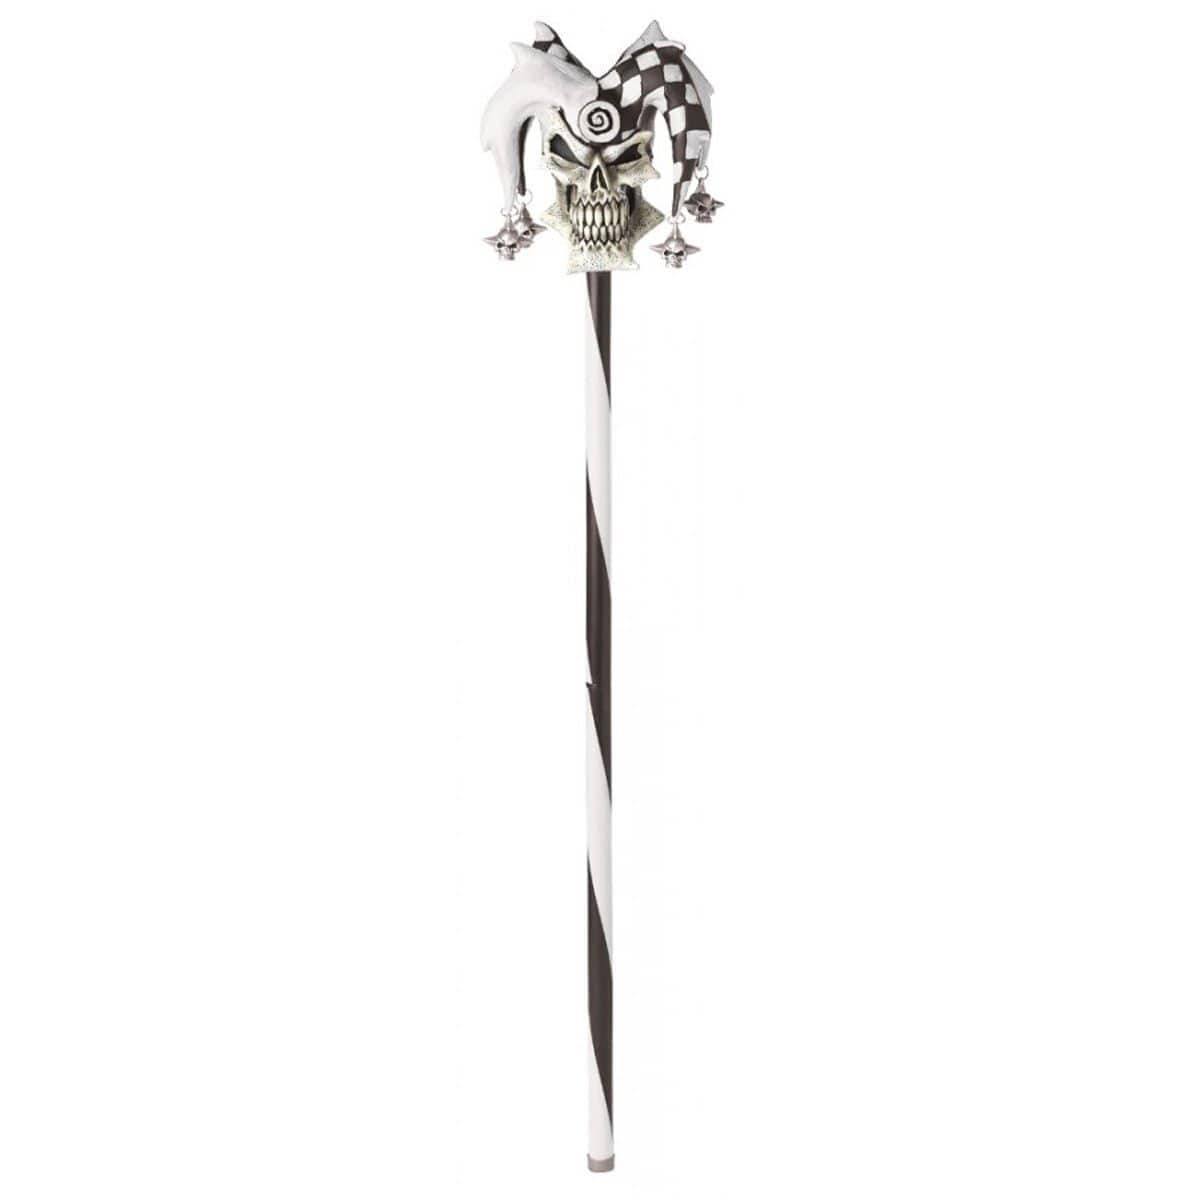 Buy Costume Accessories White & black psycho jester cane sold at Party Expert